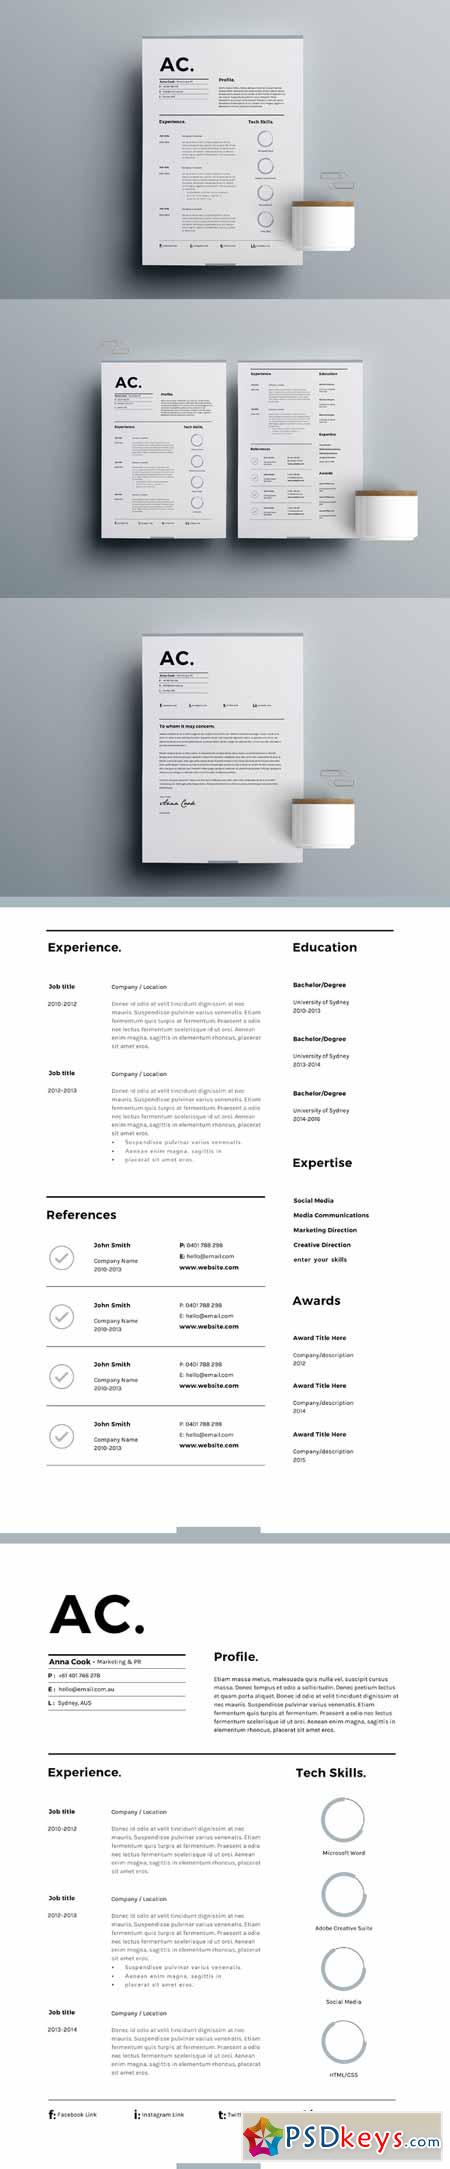 resume template 3 page cv template 636078  u00bb free download photoshop vector stock image via